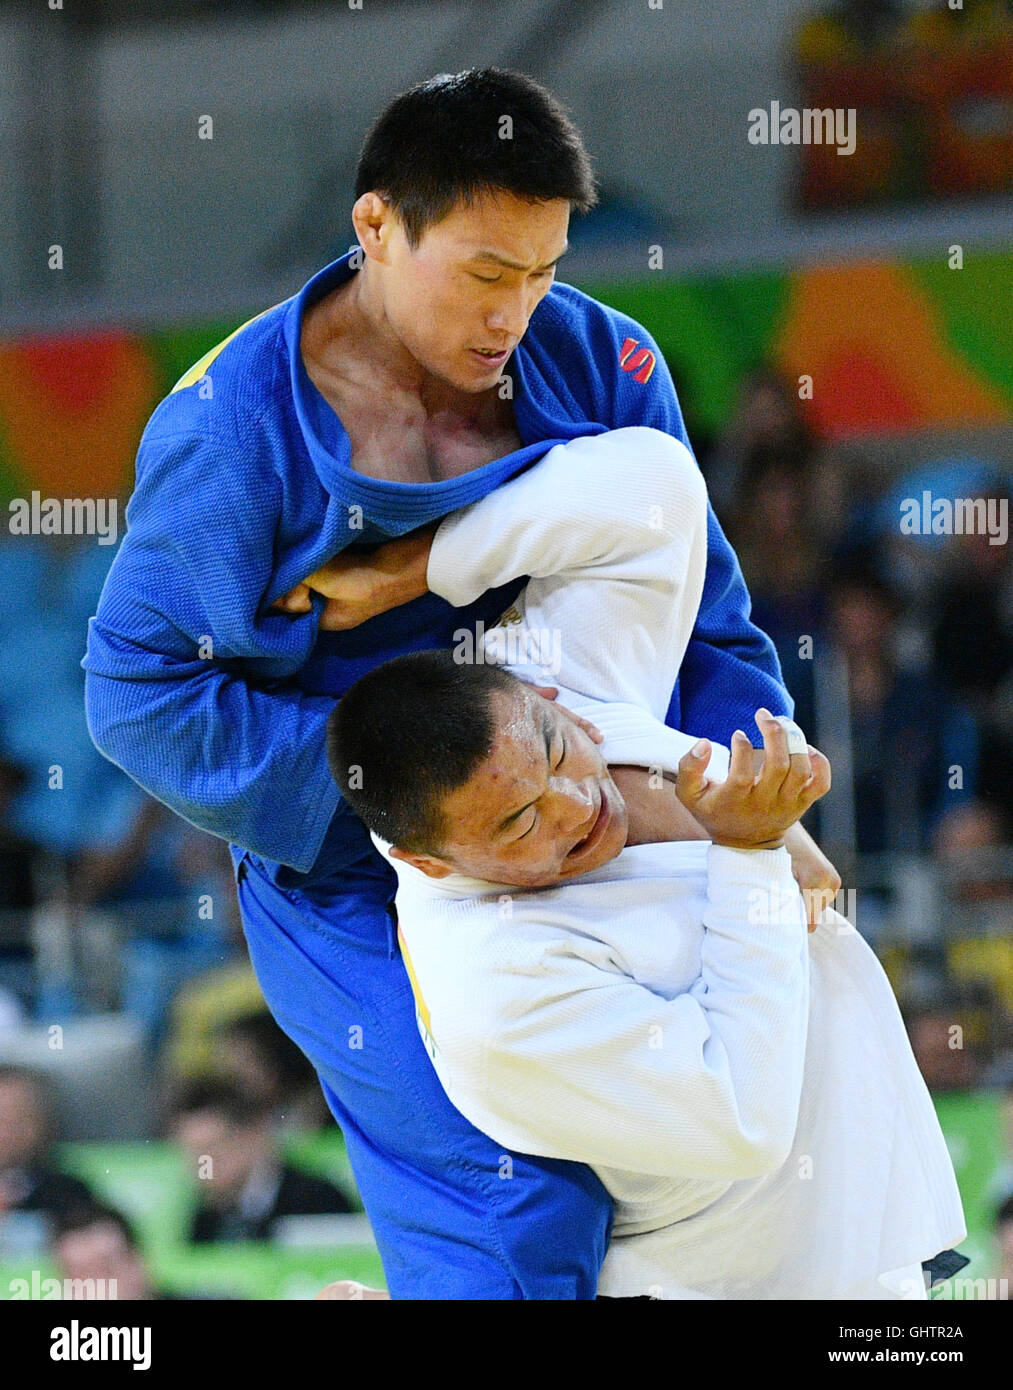 Rio de Janeiro, Brazil. 10th Aug, 2016. O Lkhagvasuren (white) of Mongolia in action against Xunzhao Cheng of China during the Men -90 kg Bronze medal contest of the Judo event during the Olympic Games at Carioca Arena 2 in Rio de Janeiro, Brazil, 10 August 2016. Cheng won the Bronze medal. Photo: Lukas Schulze/dpa/Alamy Live News Stock Photo